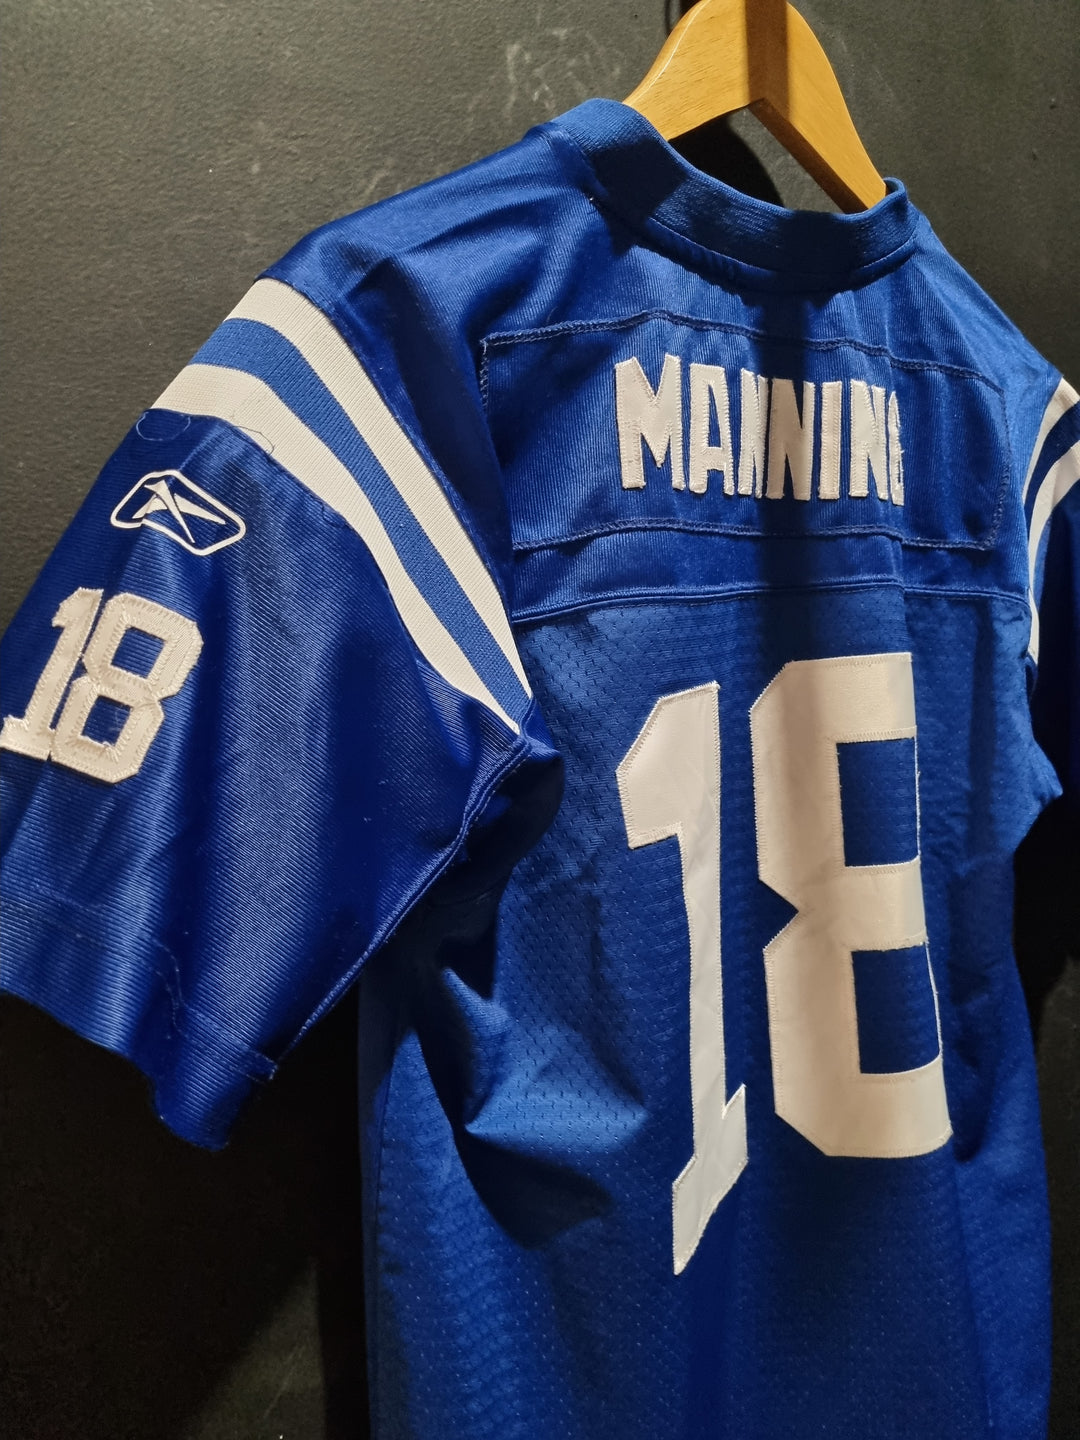 Colts Manning Reebok Youth L 10/12